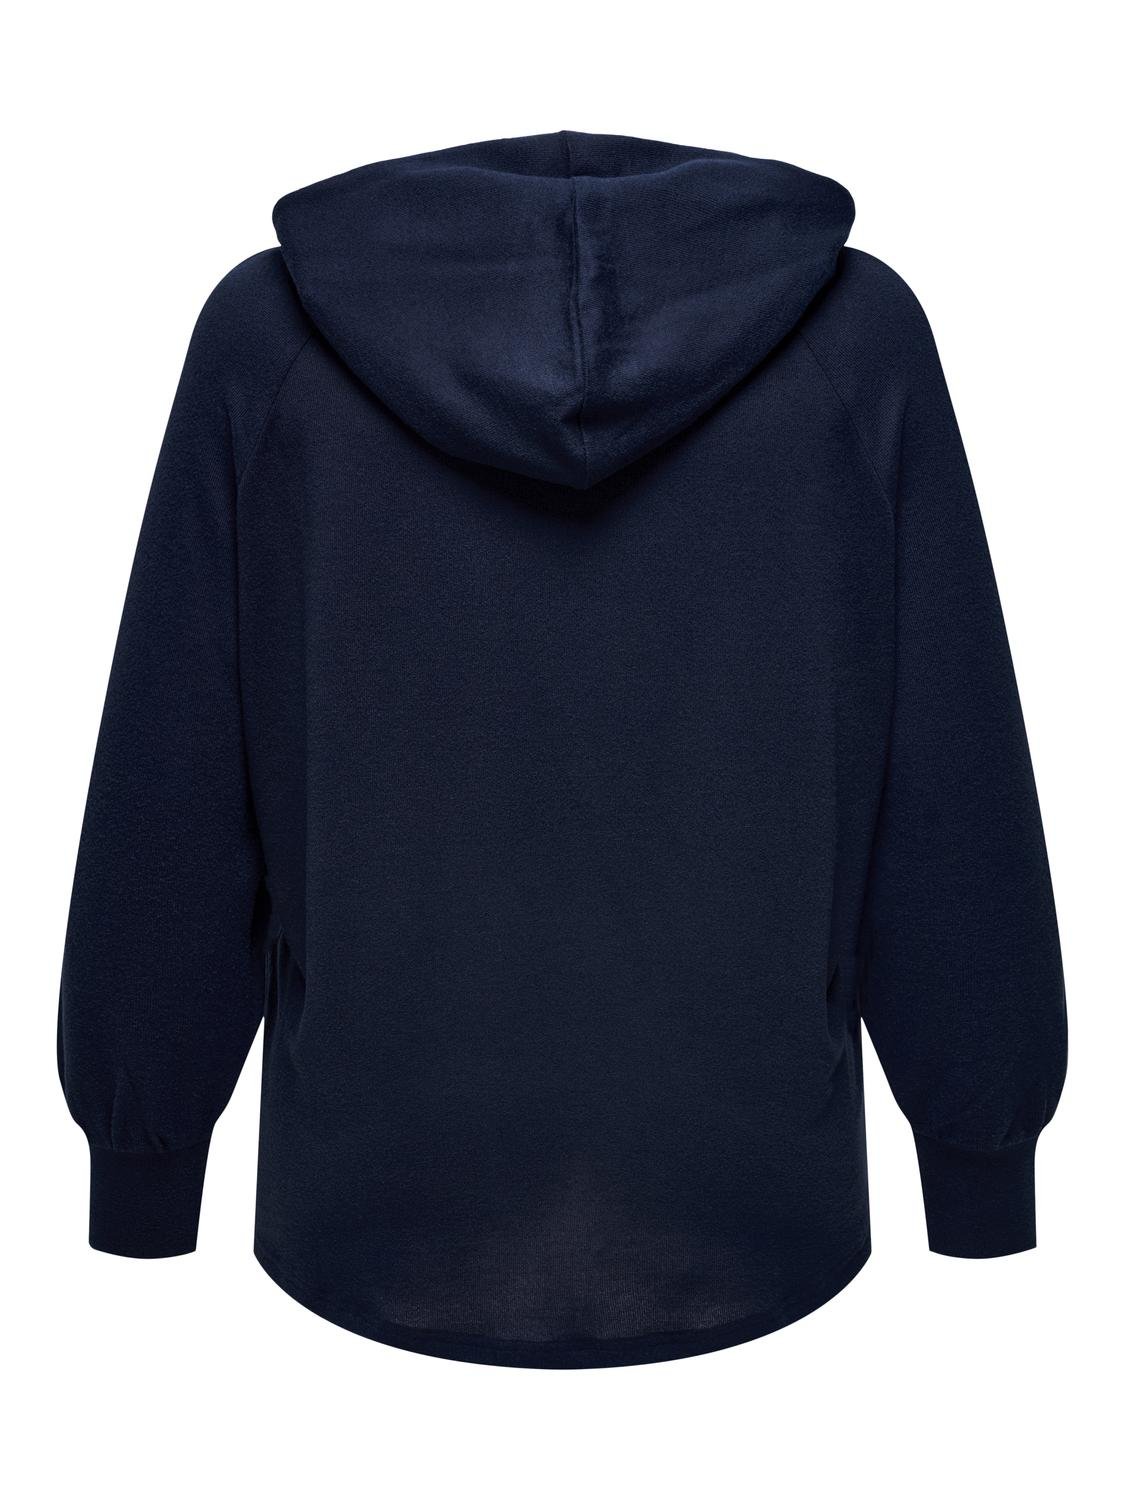 ONLY Curvy solid color hoodie -Night Sky - 15310492